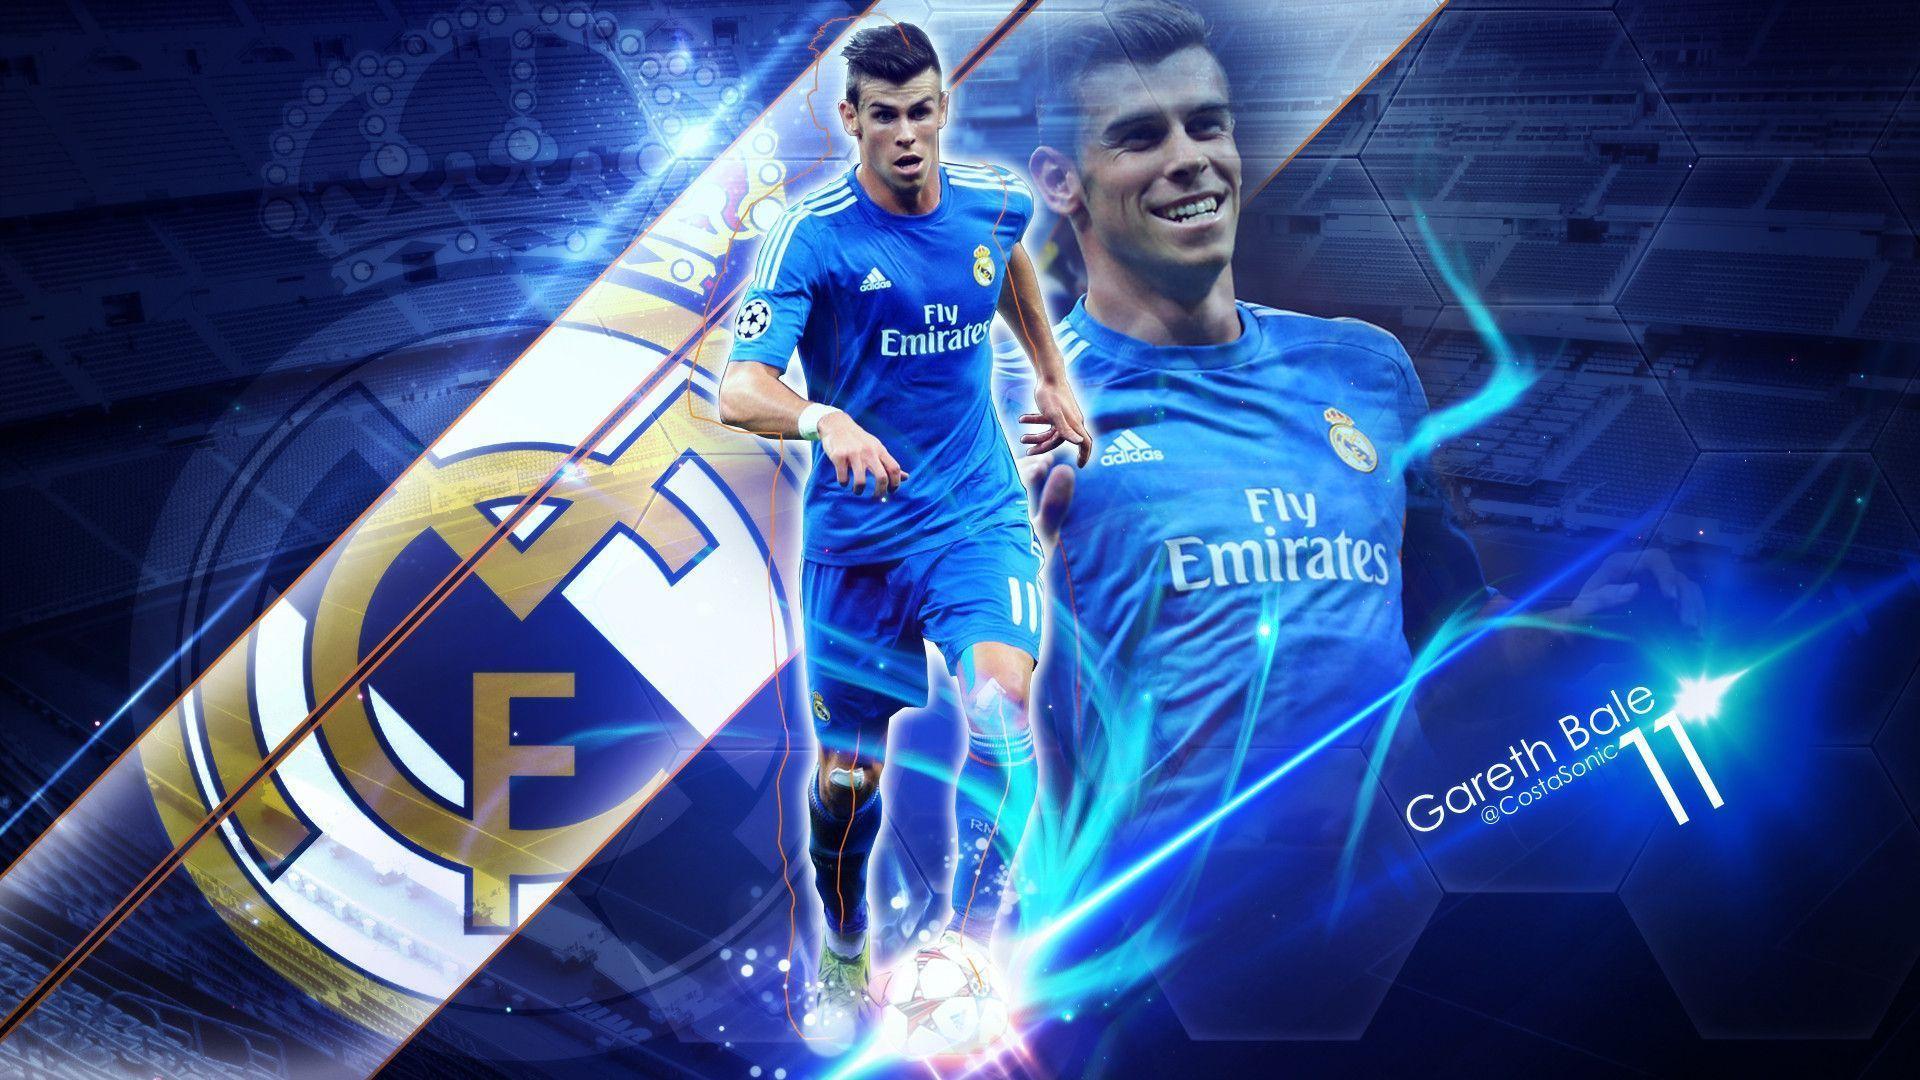 Exclusive Gareth Bale Real Madrid Wide Wallpapers,Backgrounds